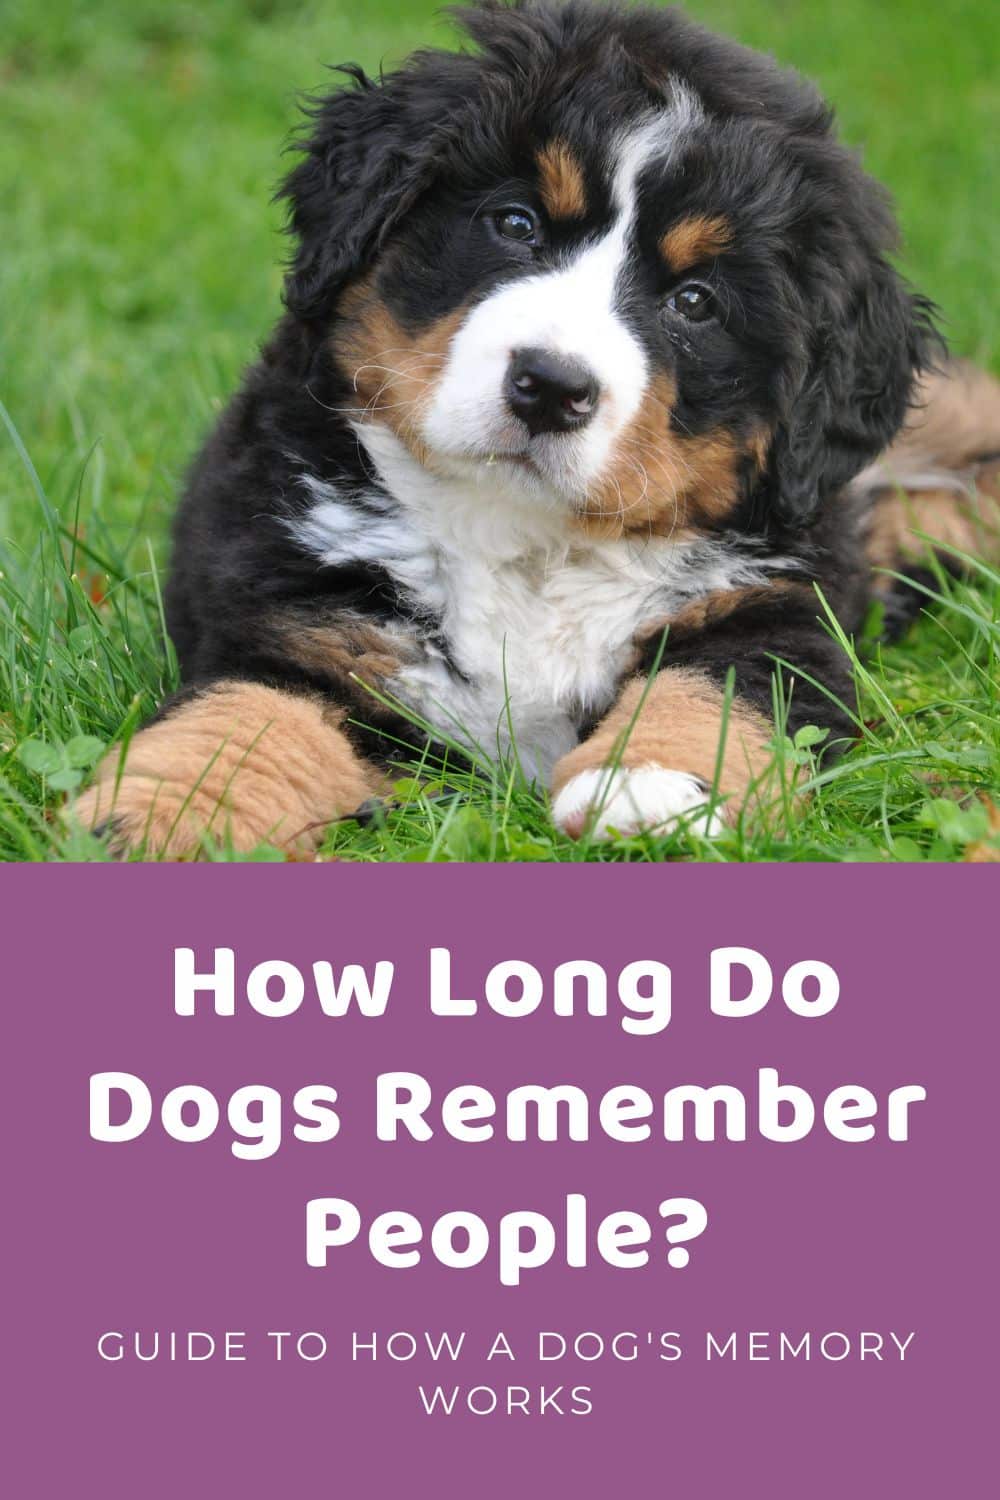 How Long Do Dogs Remember People